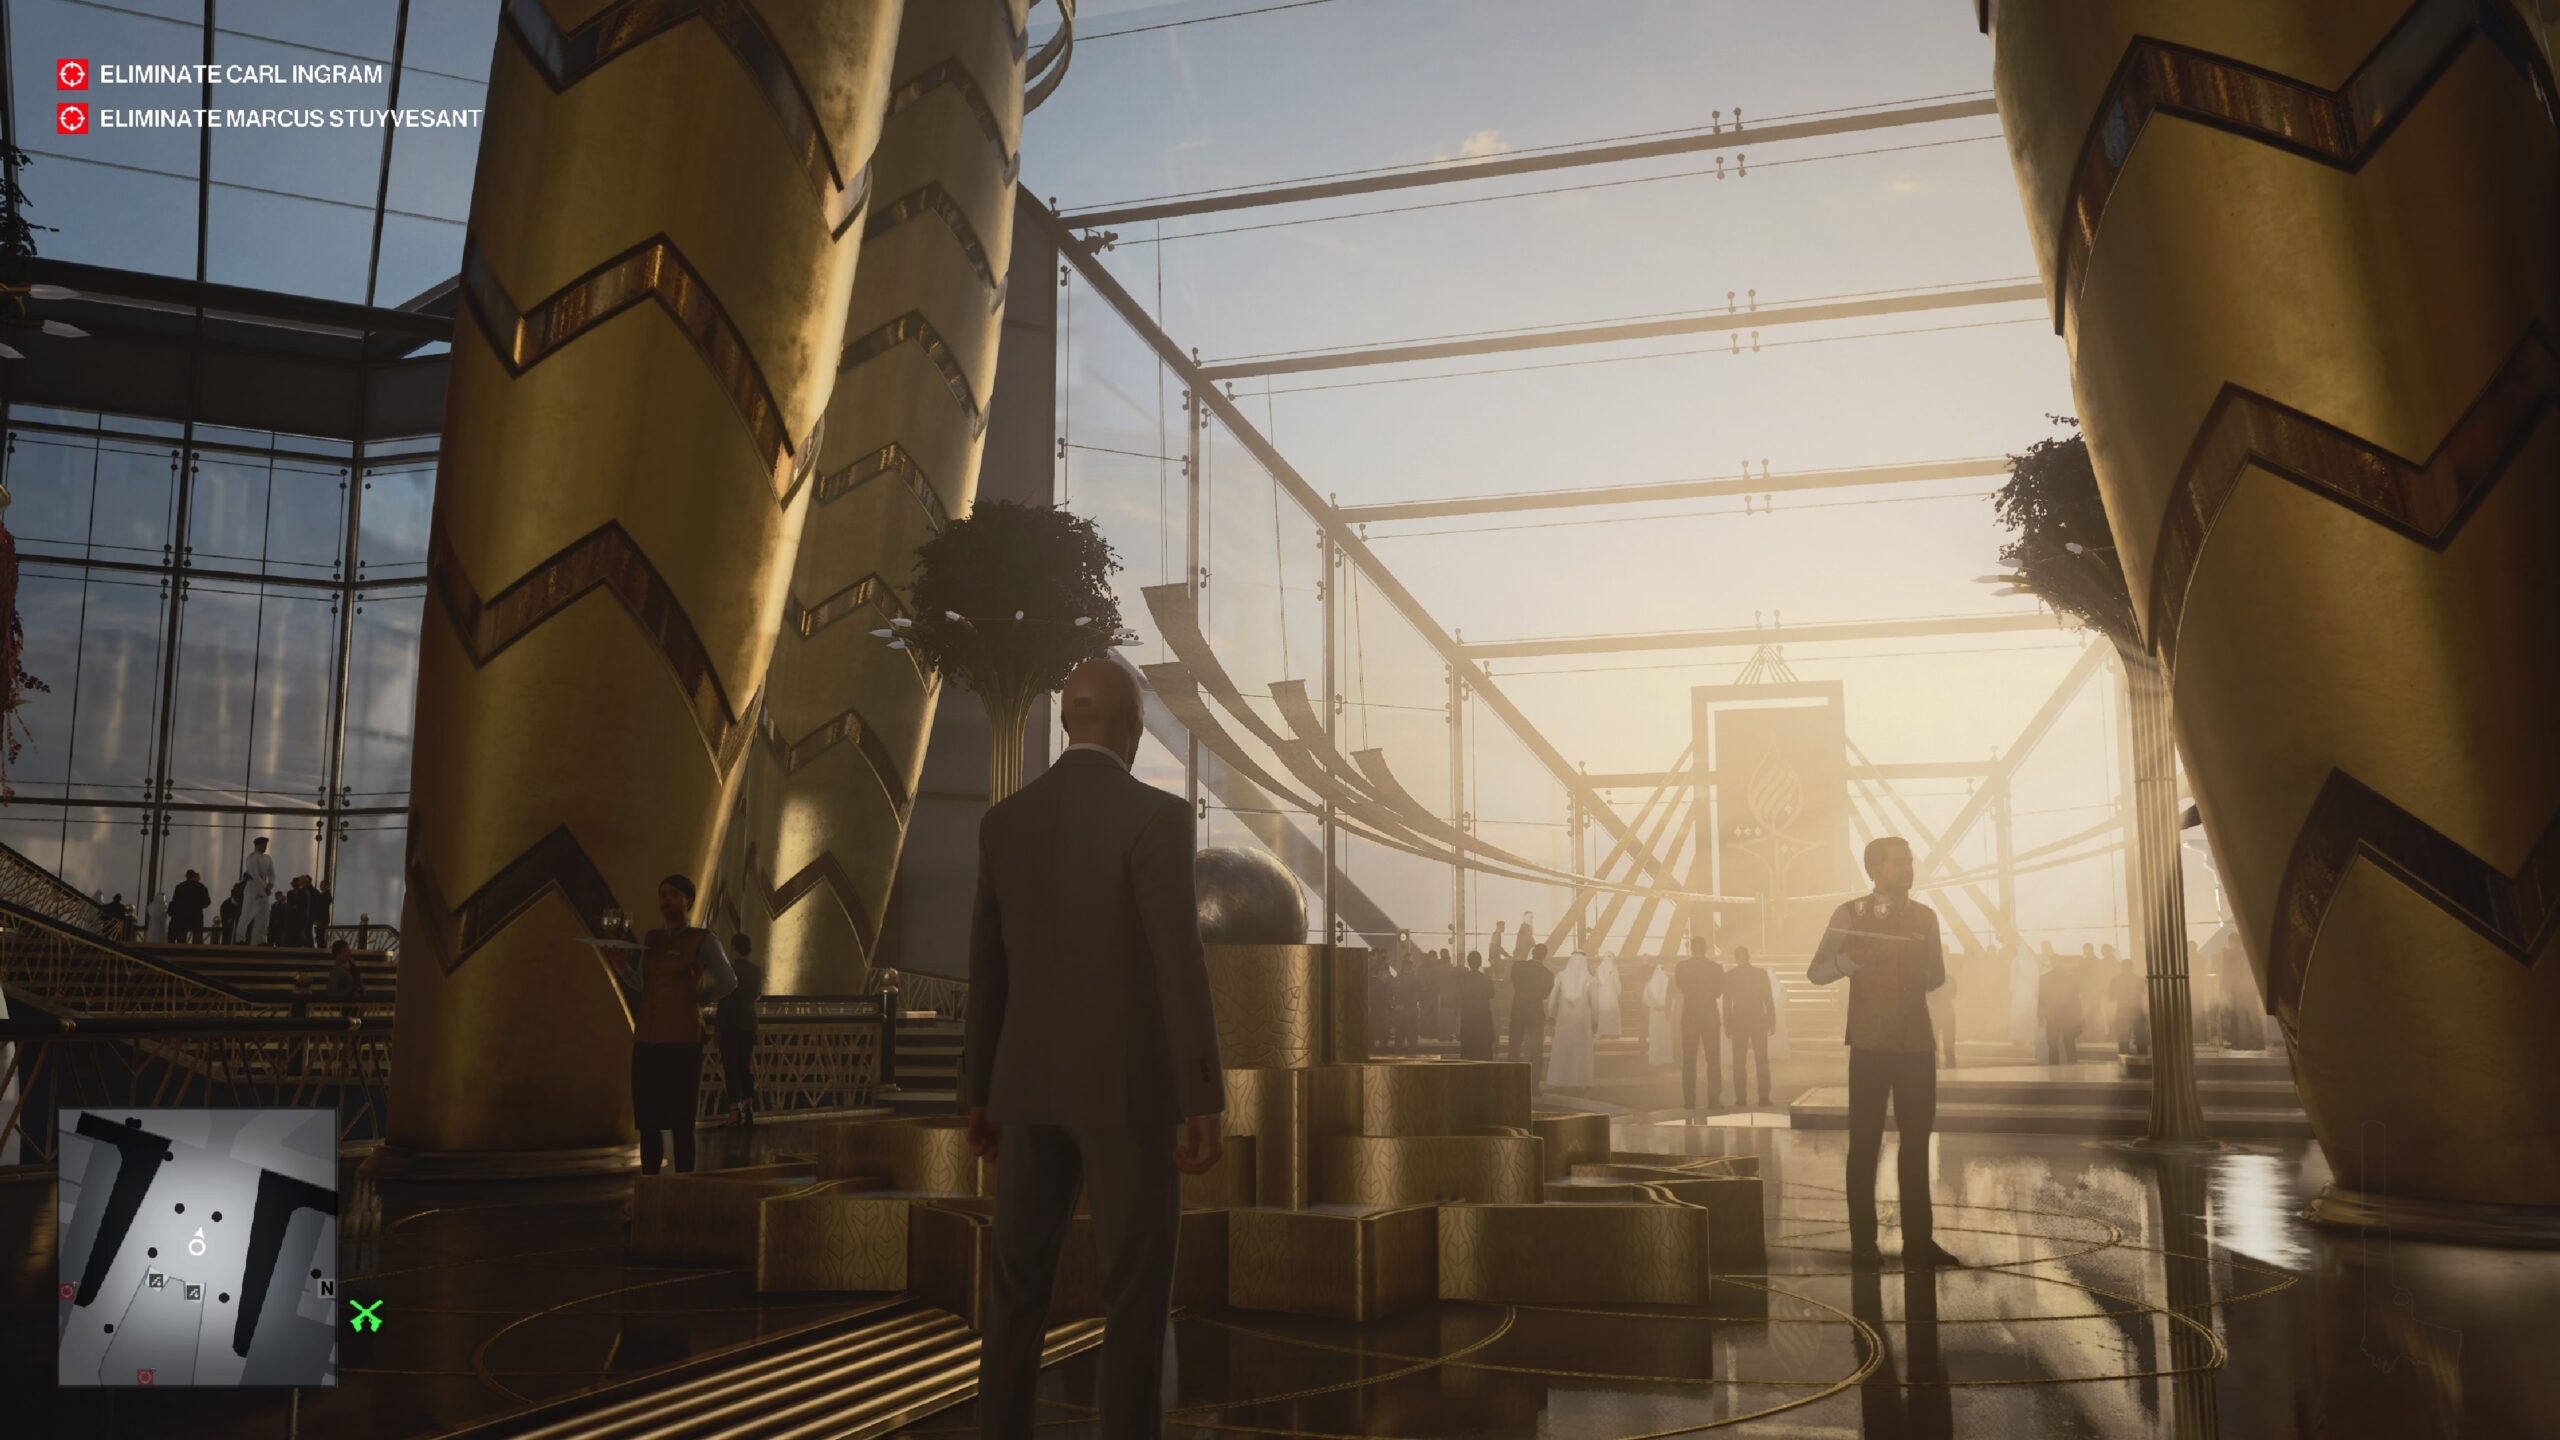 Hitman 3's Dubai mission and the original version of XIII are